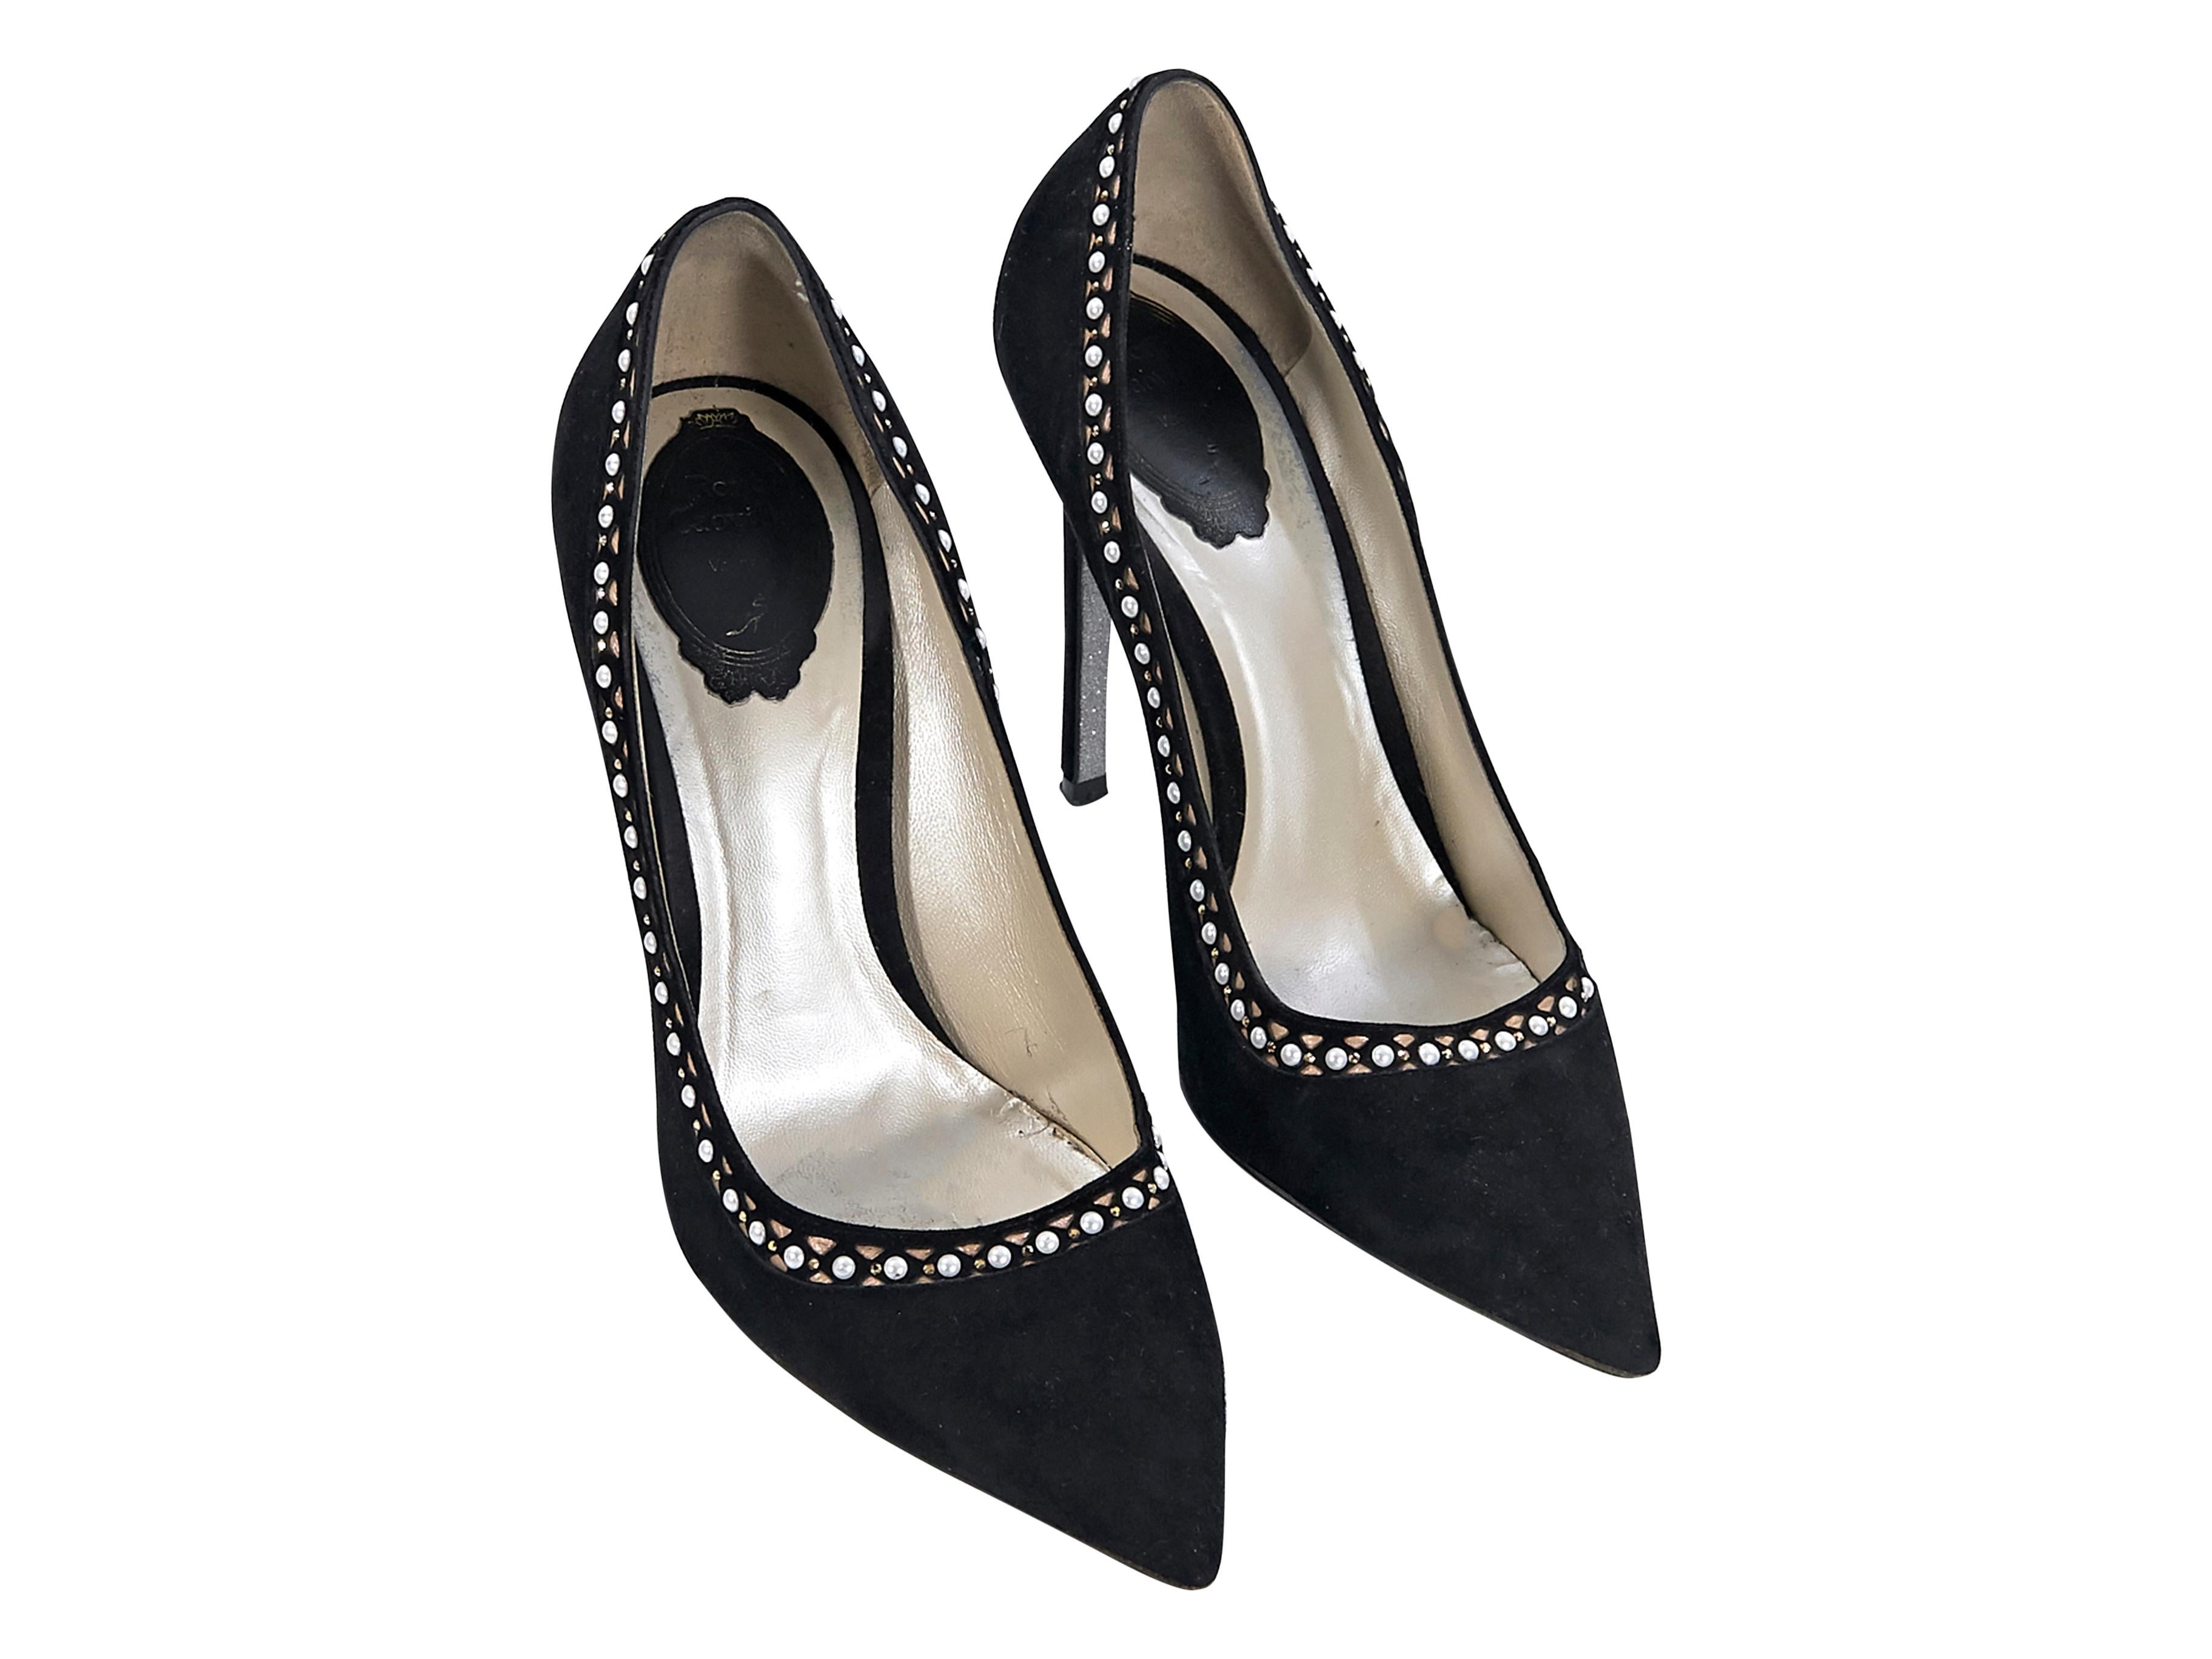 Product details:  Black suede pumps by Rene Caovilla.  Embellished trim.  Point toe.  Slip-on style.  4